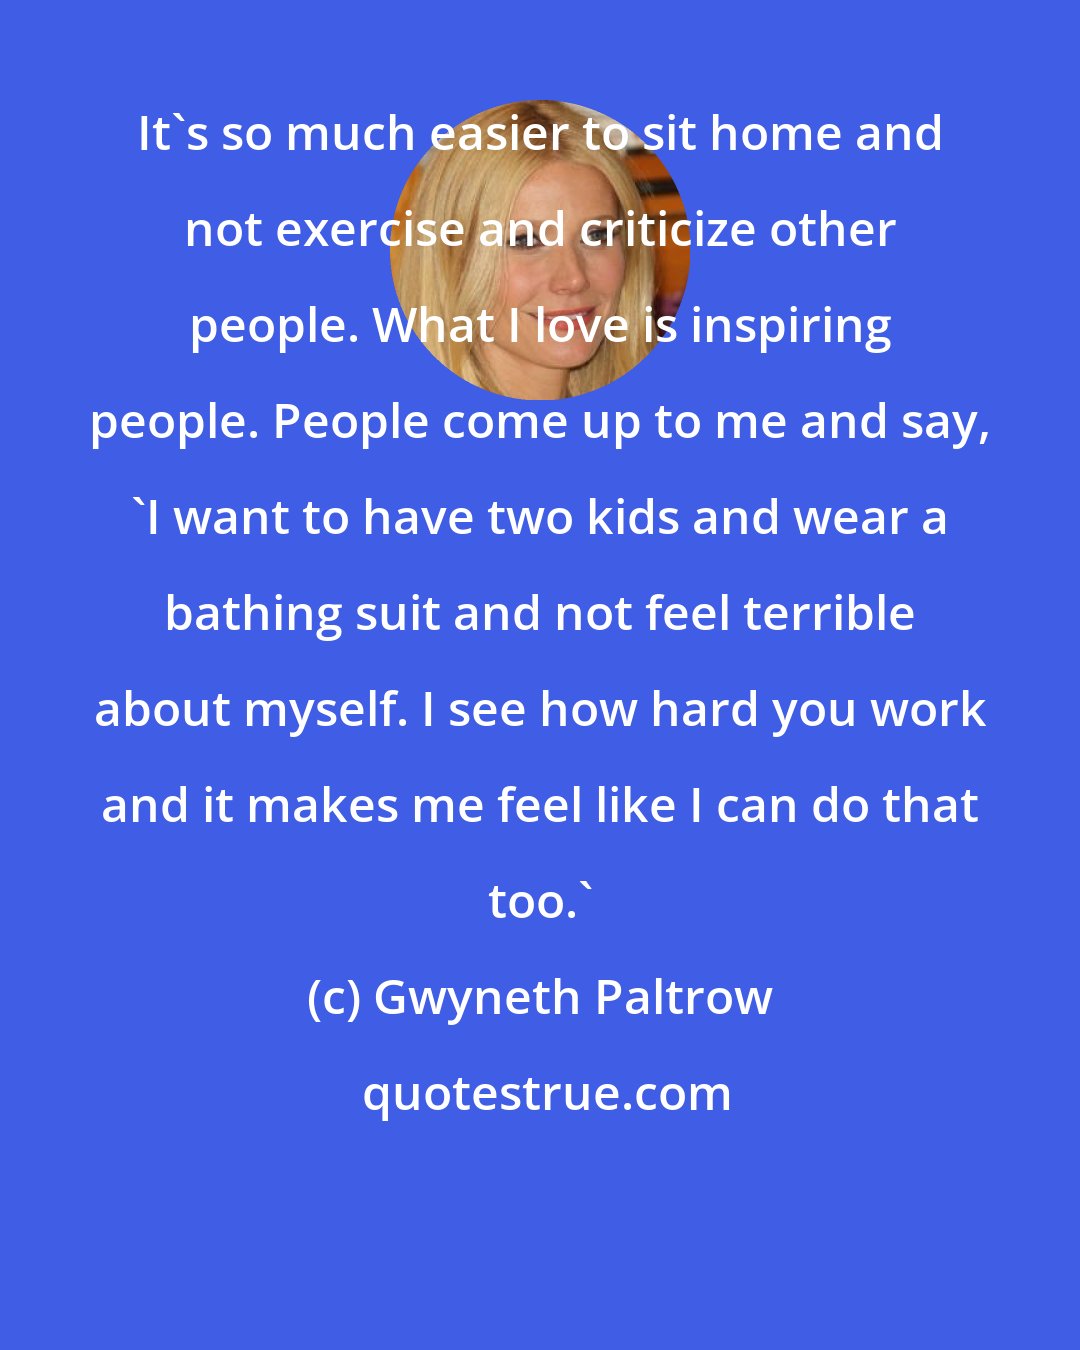 Gwyneth Paltrow: It's so much easier to sit home and not exercise and criticize other people. What I love is inspiring people. People come up to me and say, 'I want to have two kids and wear a bathing suit and not feel terrible about myself. I see how hard you work and it makes me feel like I can do that too.'